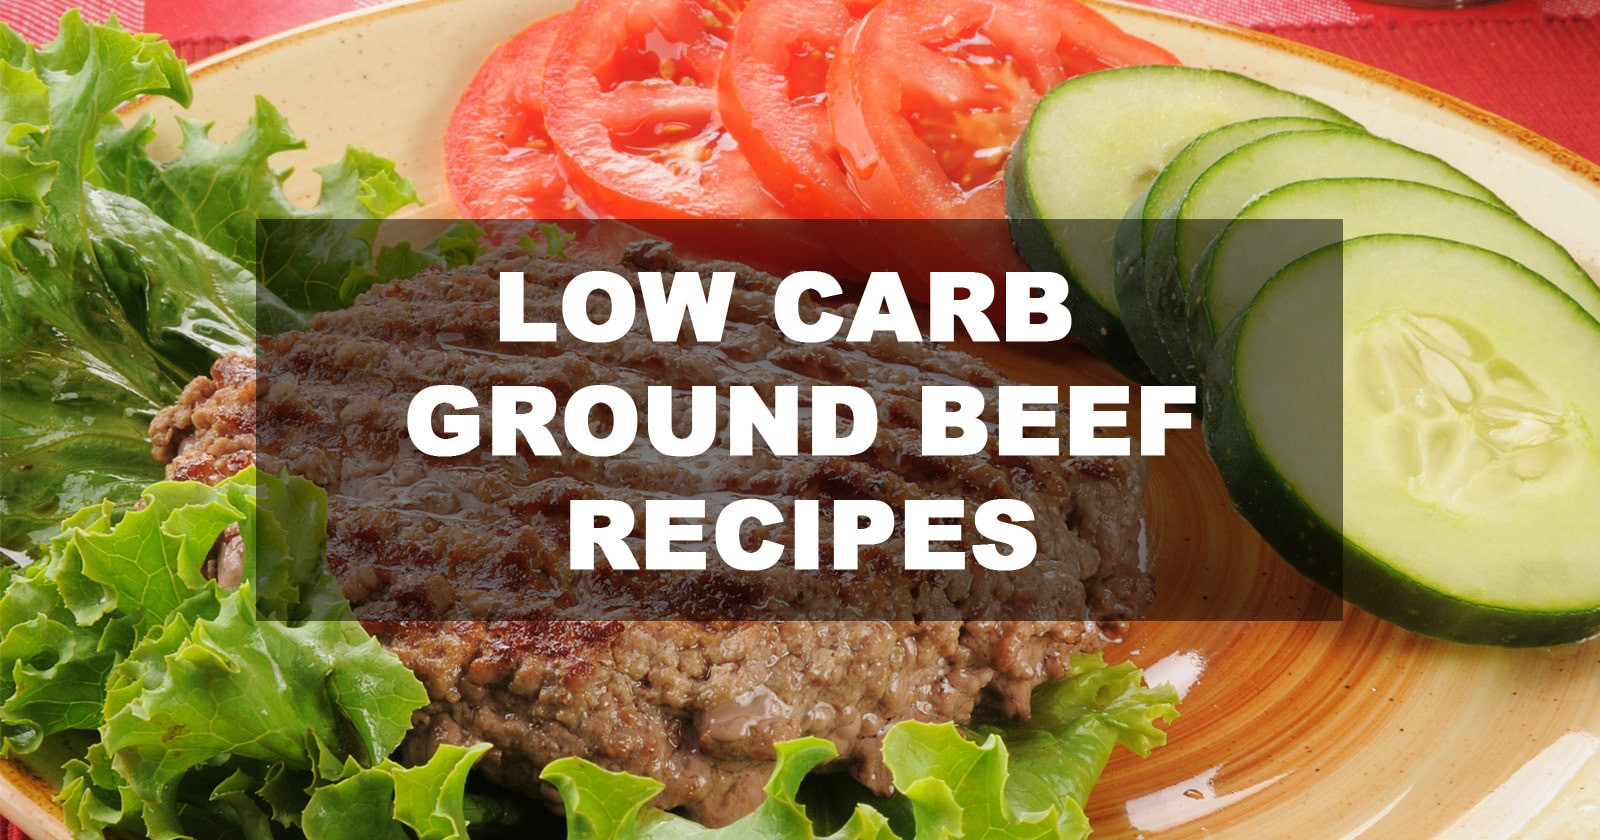 Low Fat Ground Beef Recipes
 Best Low Carb Ground Beef Recipes October 2018